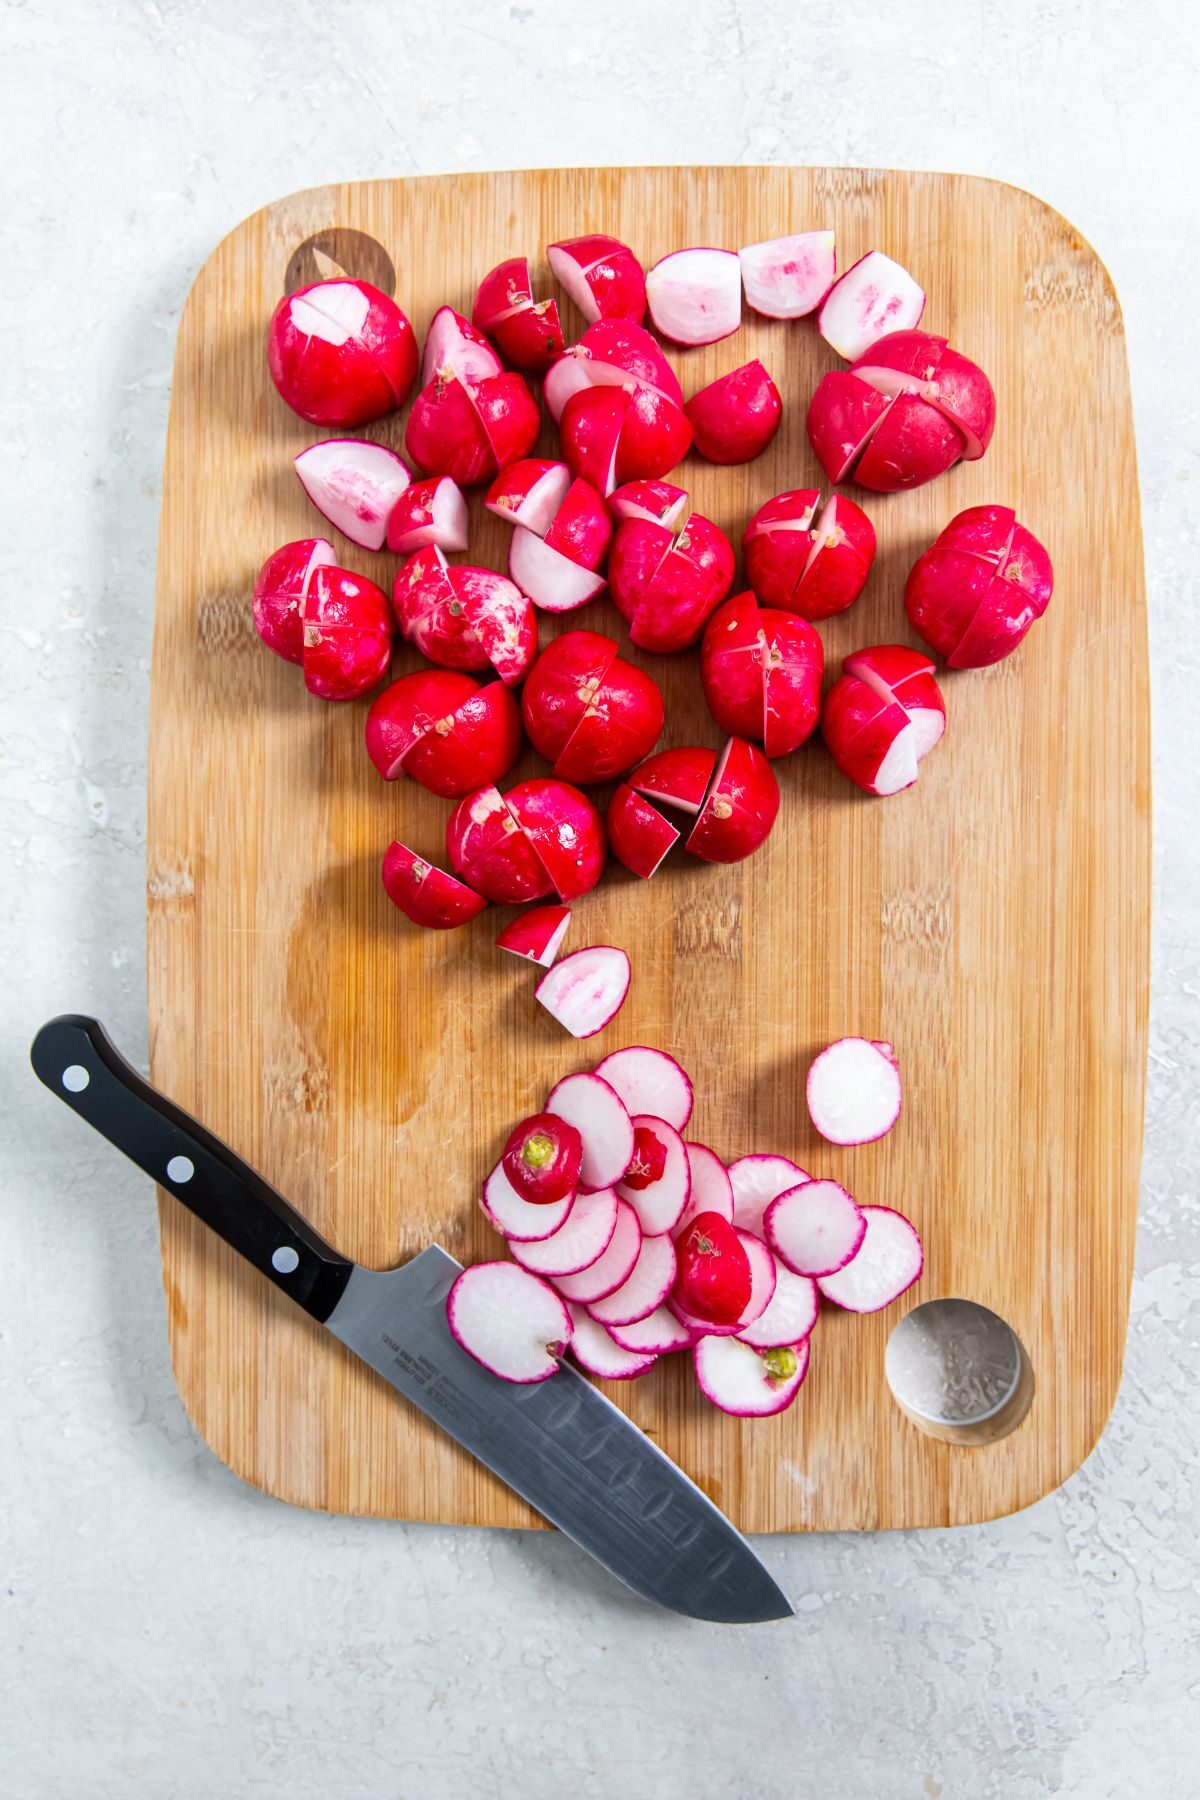 Radishes on a cutting board with a knife cut in half